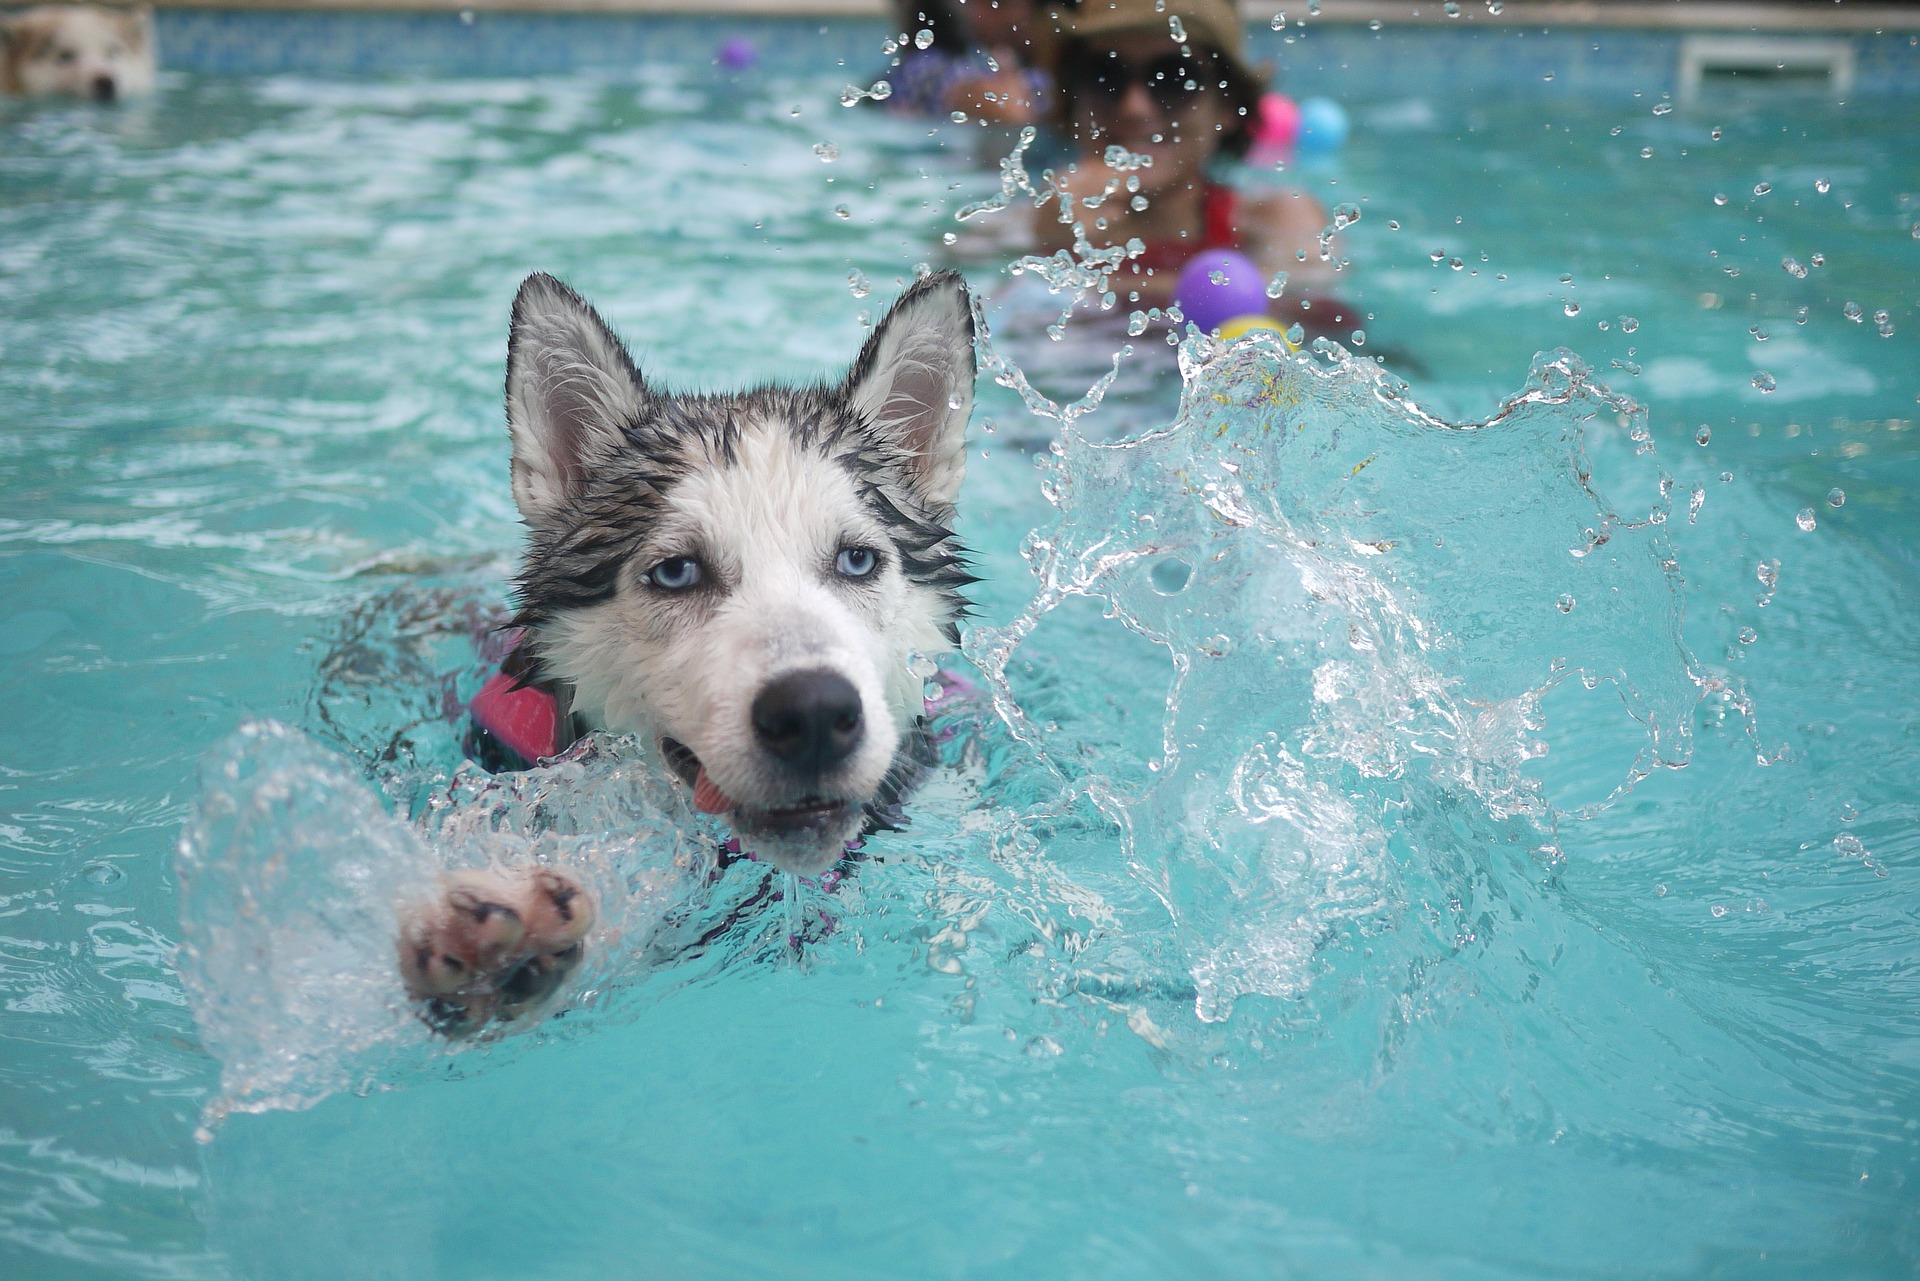 A dog in a swimming pool